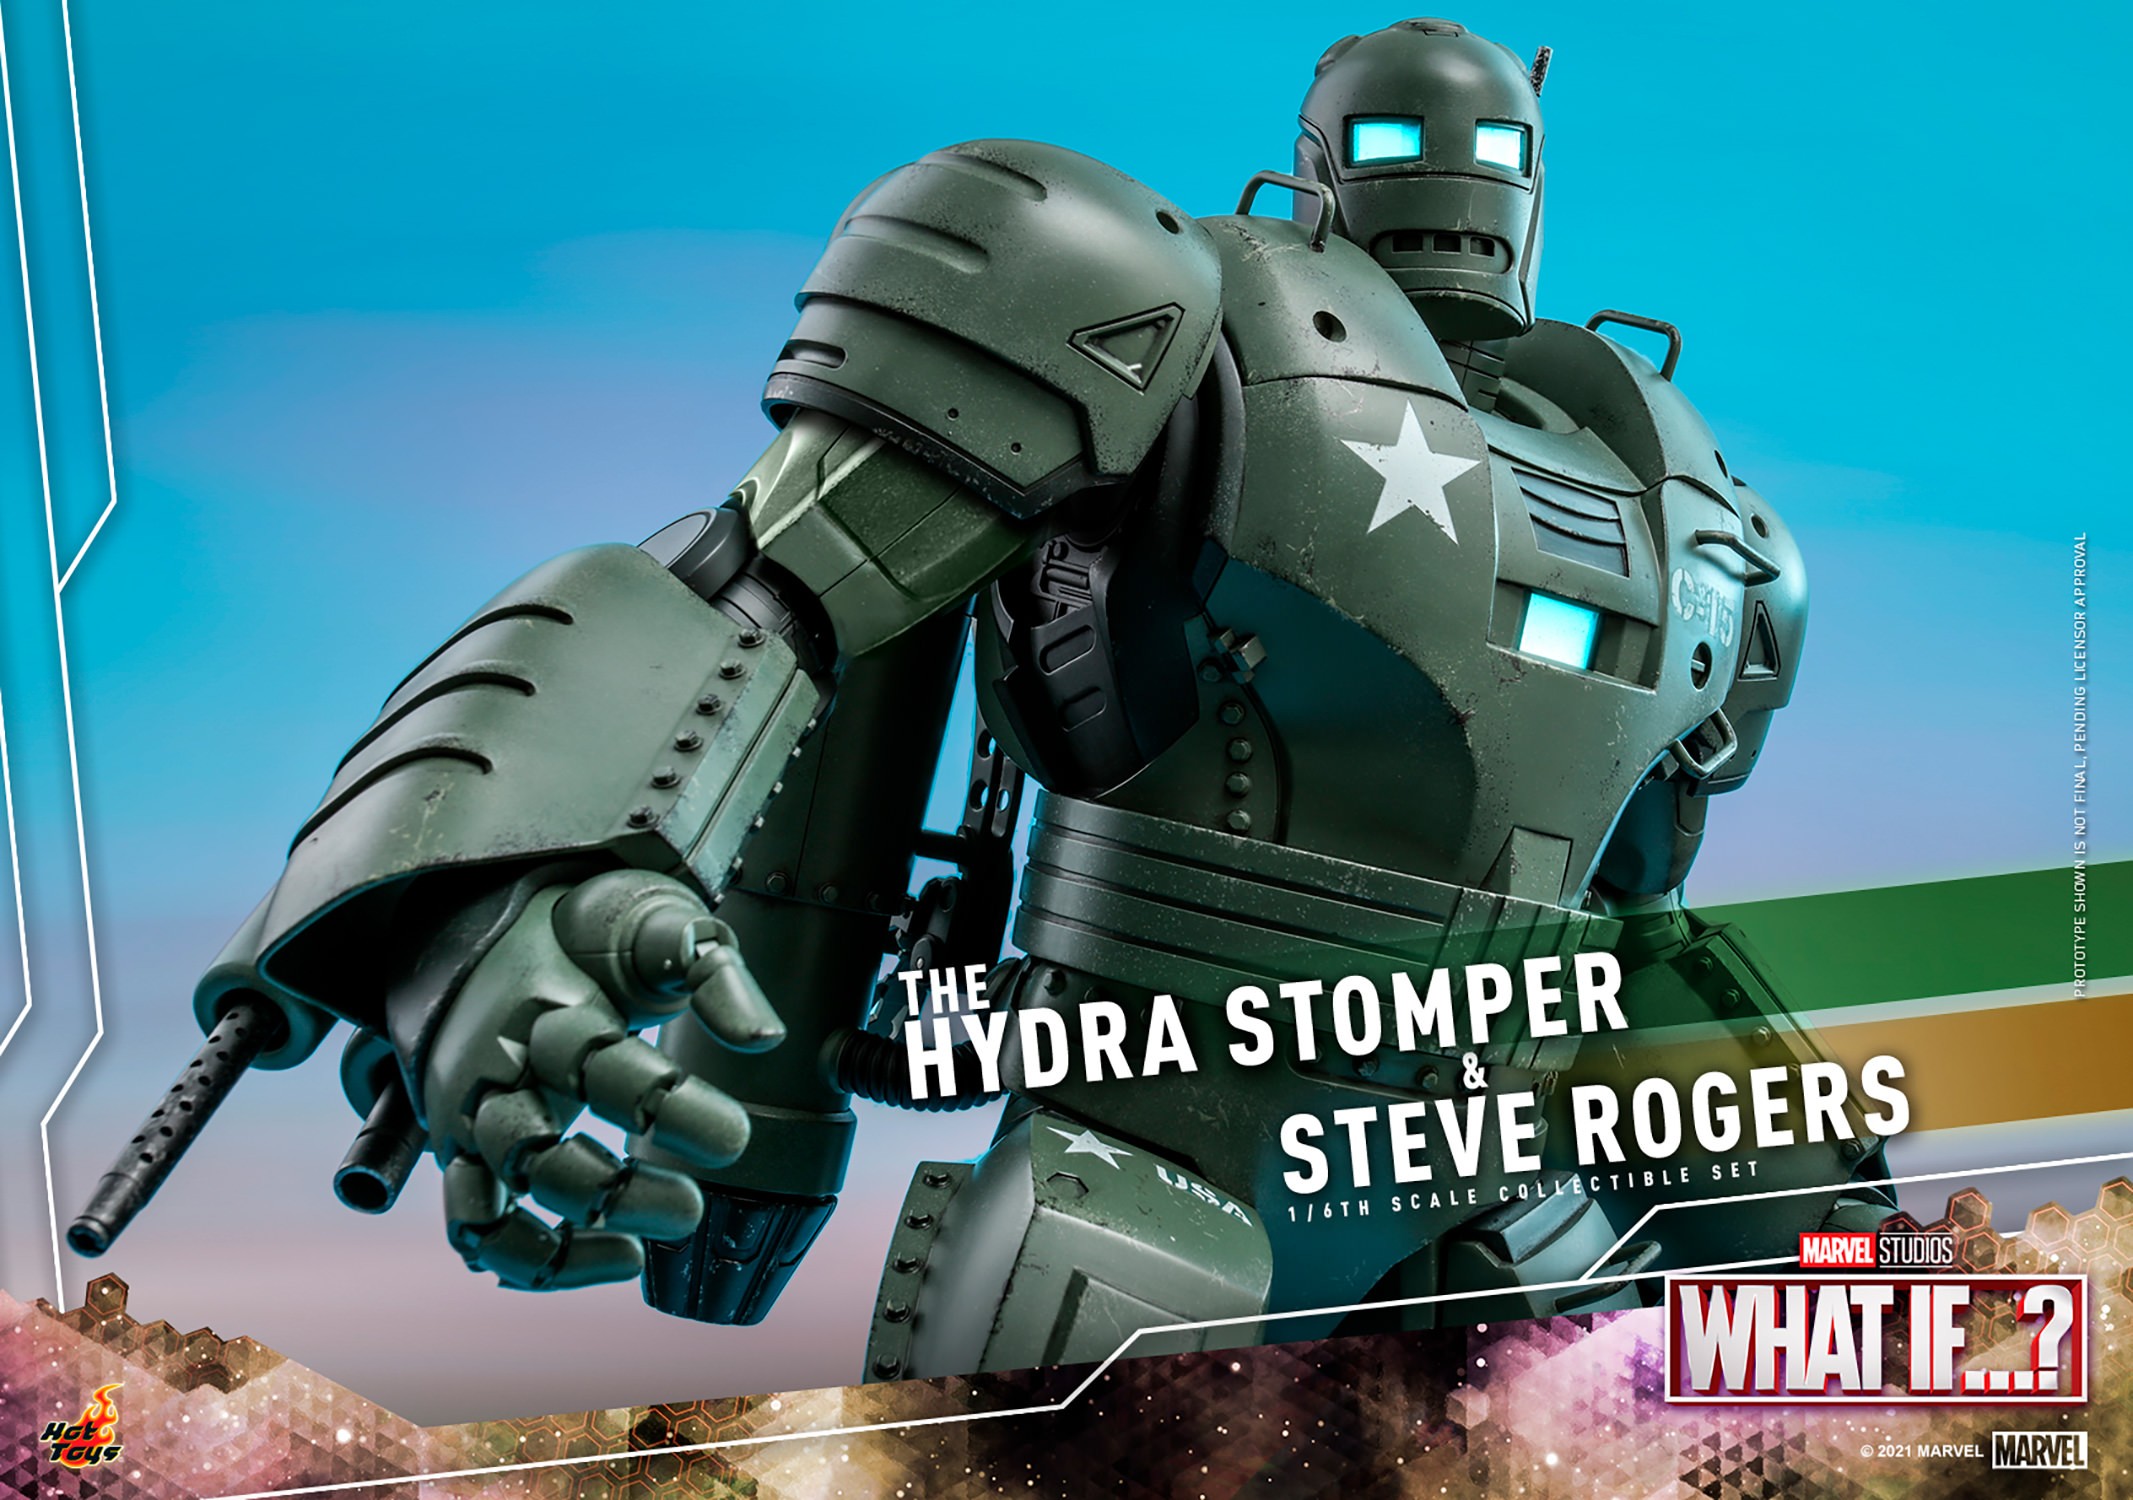 Steve Rogers and The Hydra Stomper